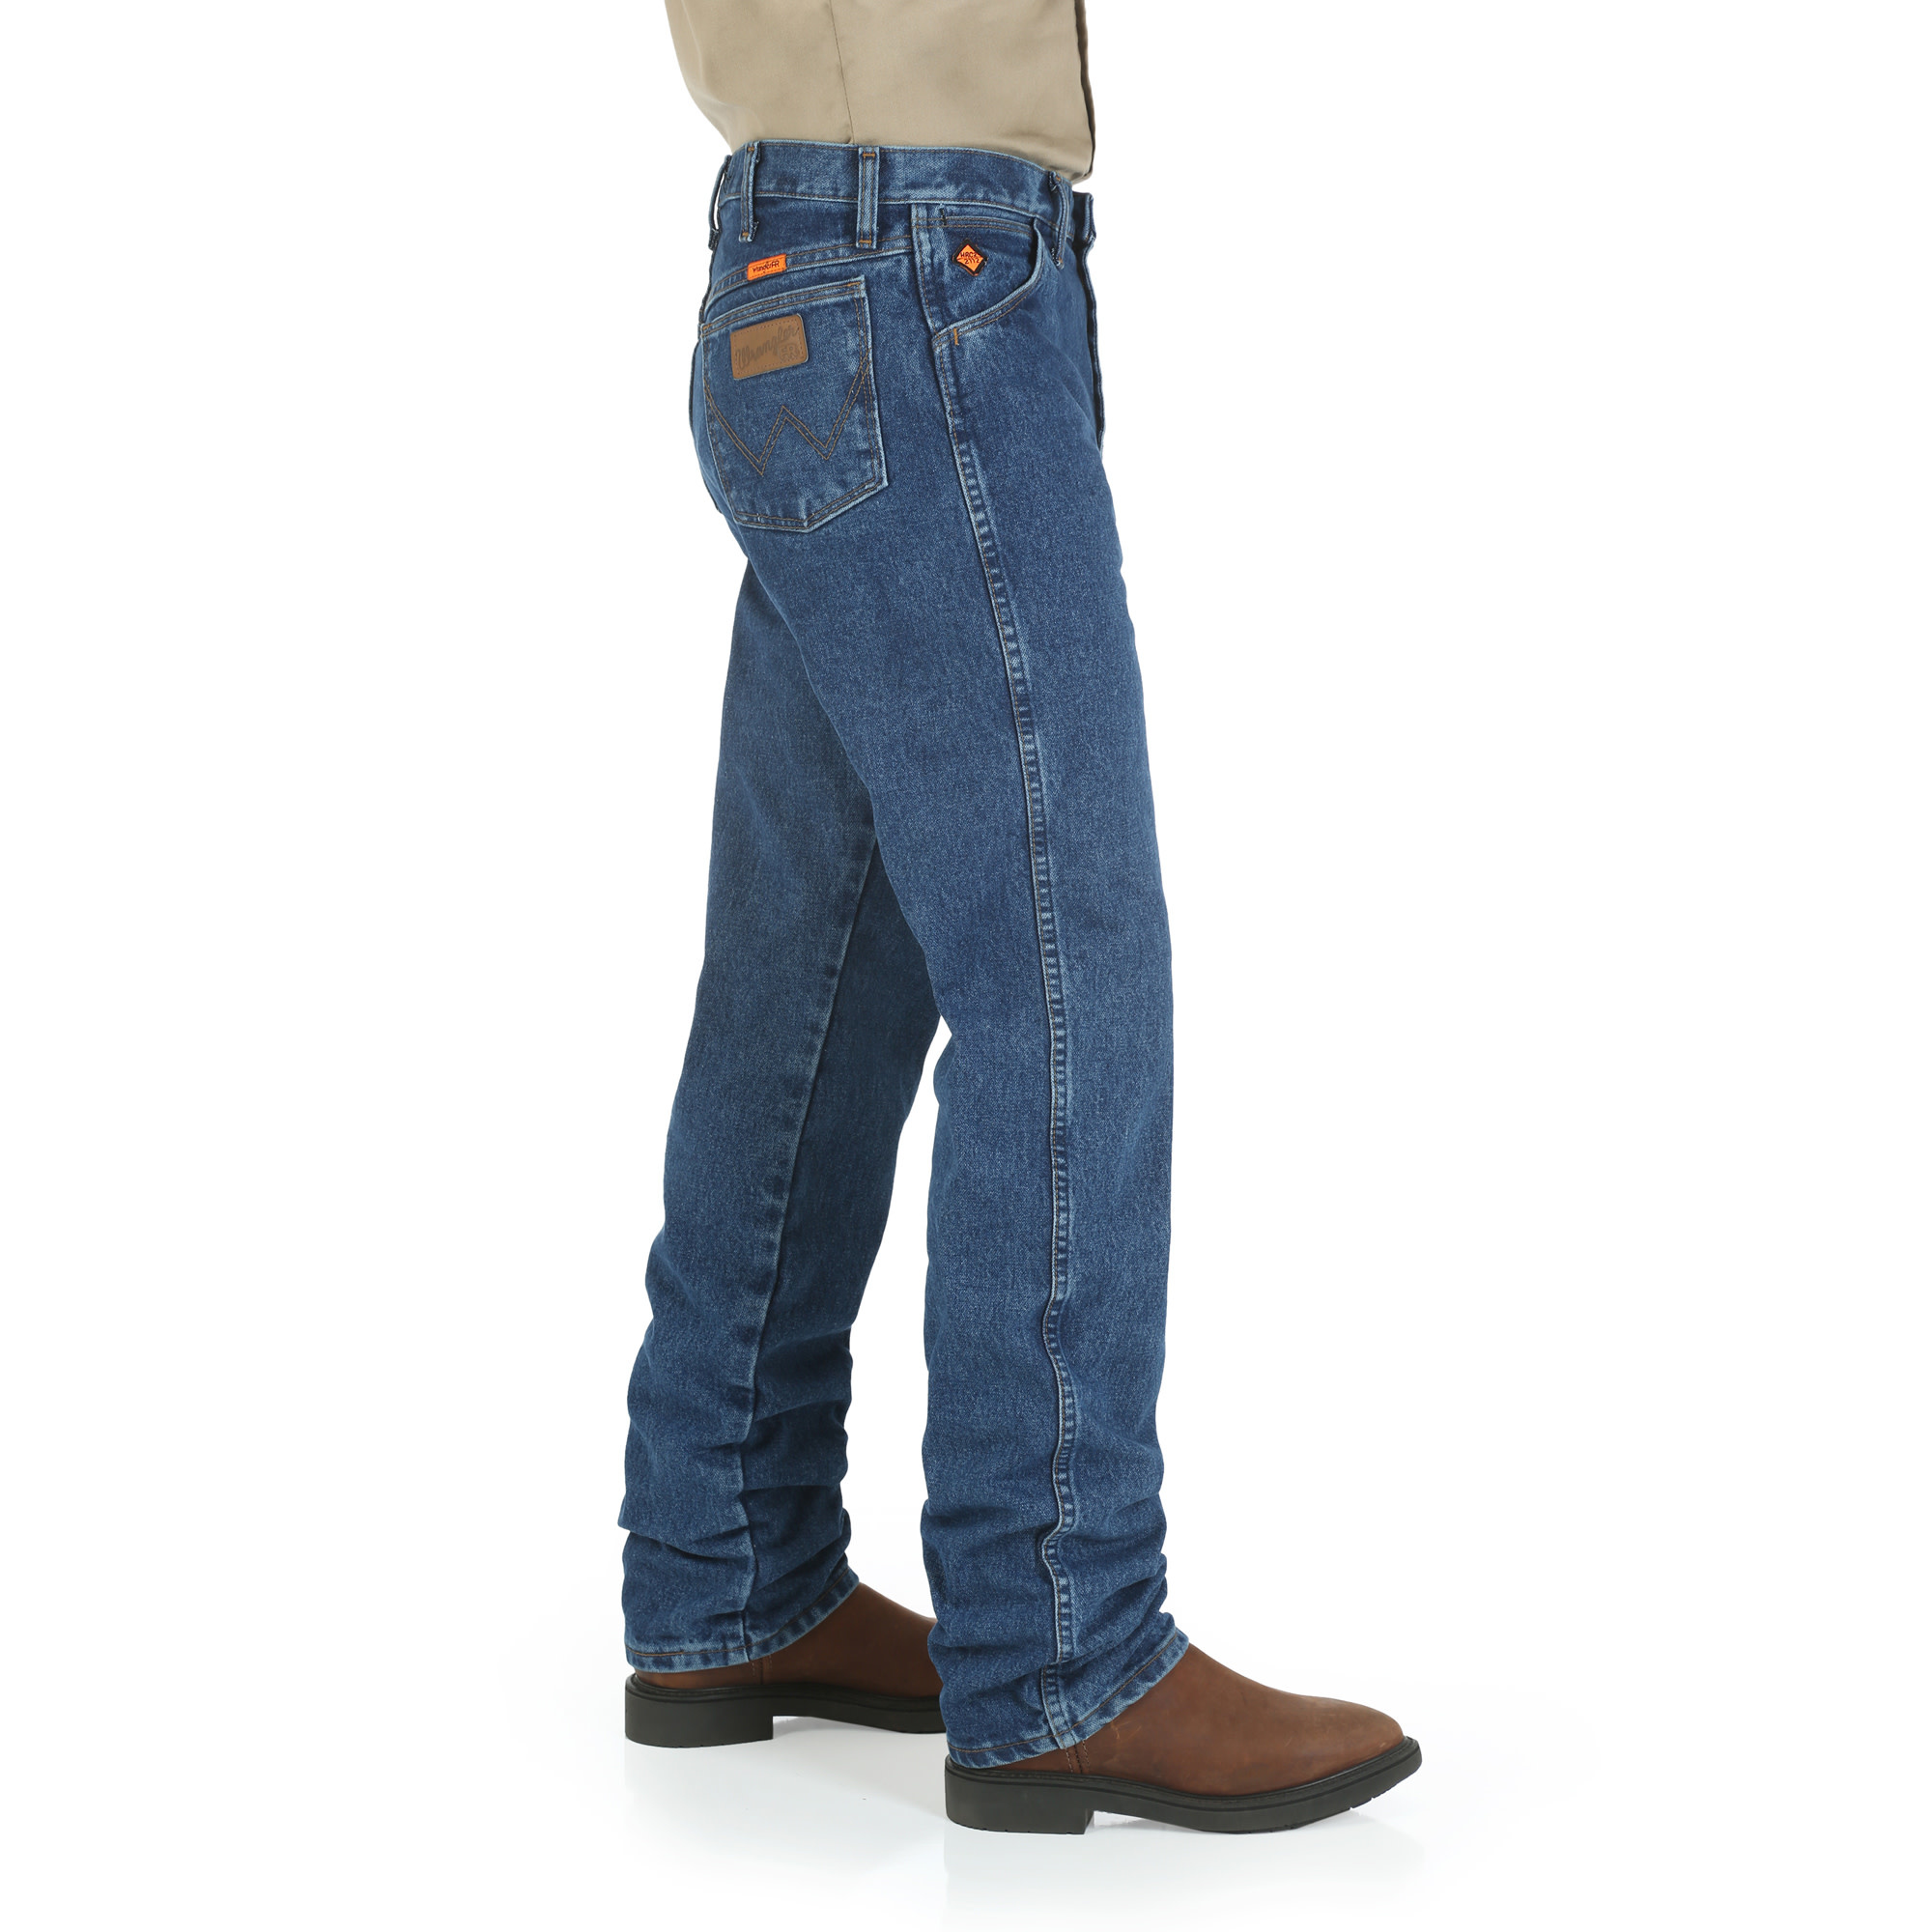 WRANGLER WORK PANTS - ORIGINAL FIT - Rocky Mountain FR Clothing Outlet